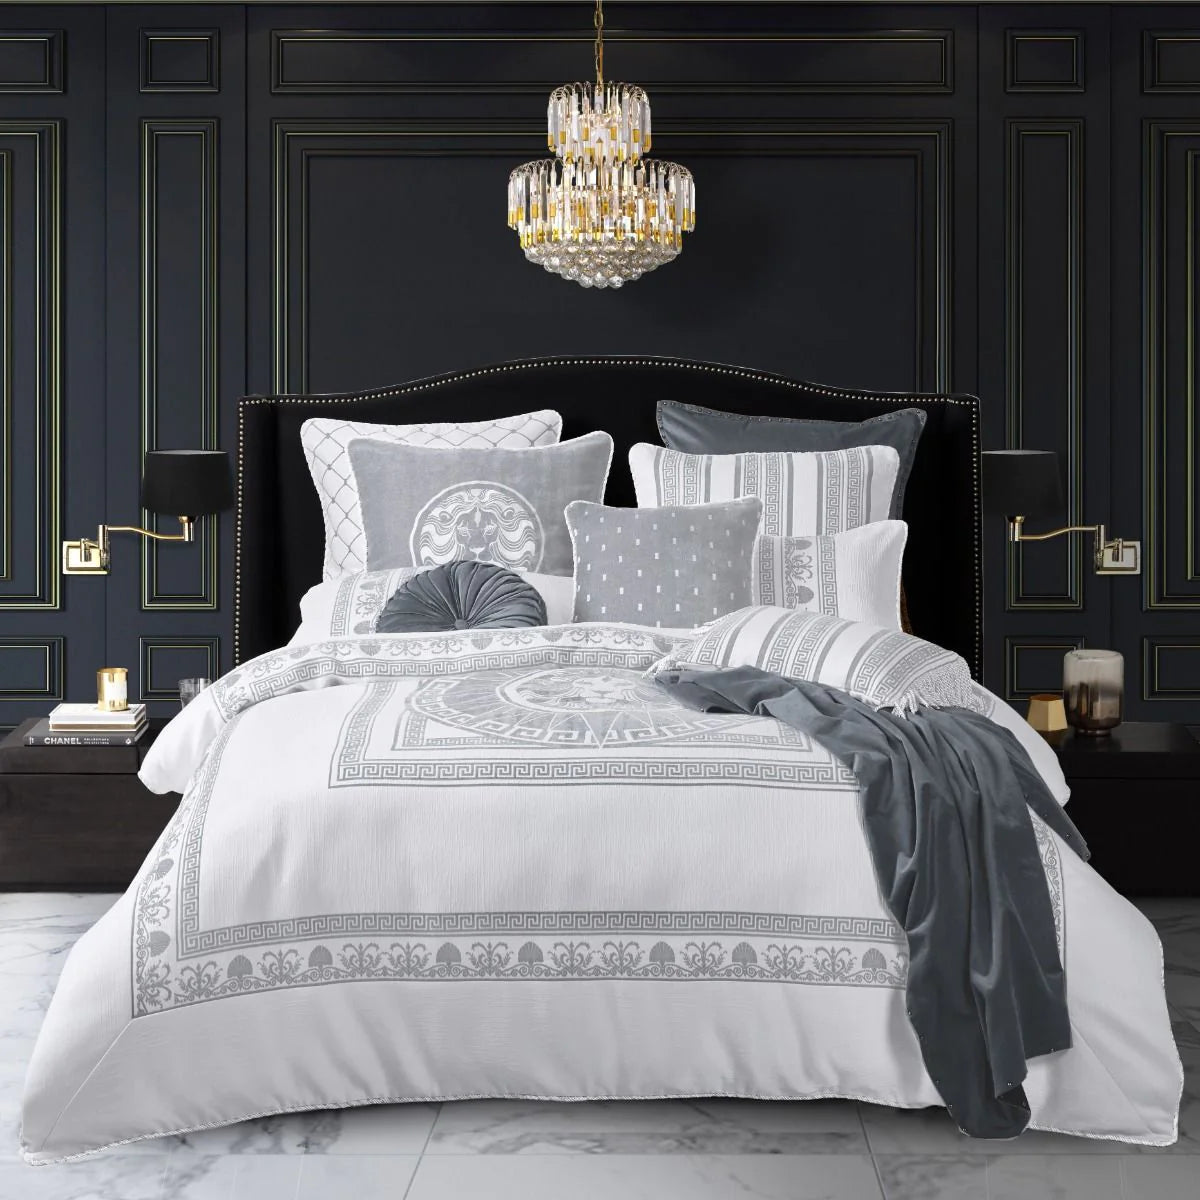 Opulent in nature and plush in texture, the Massimo Silver Quilt Set brings decadence to your bedroom